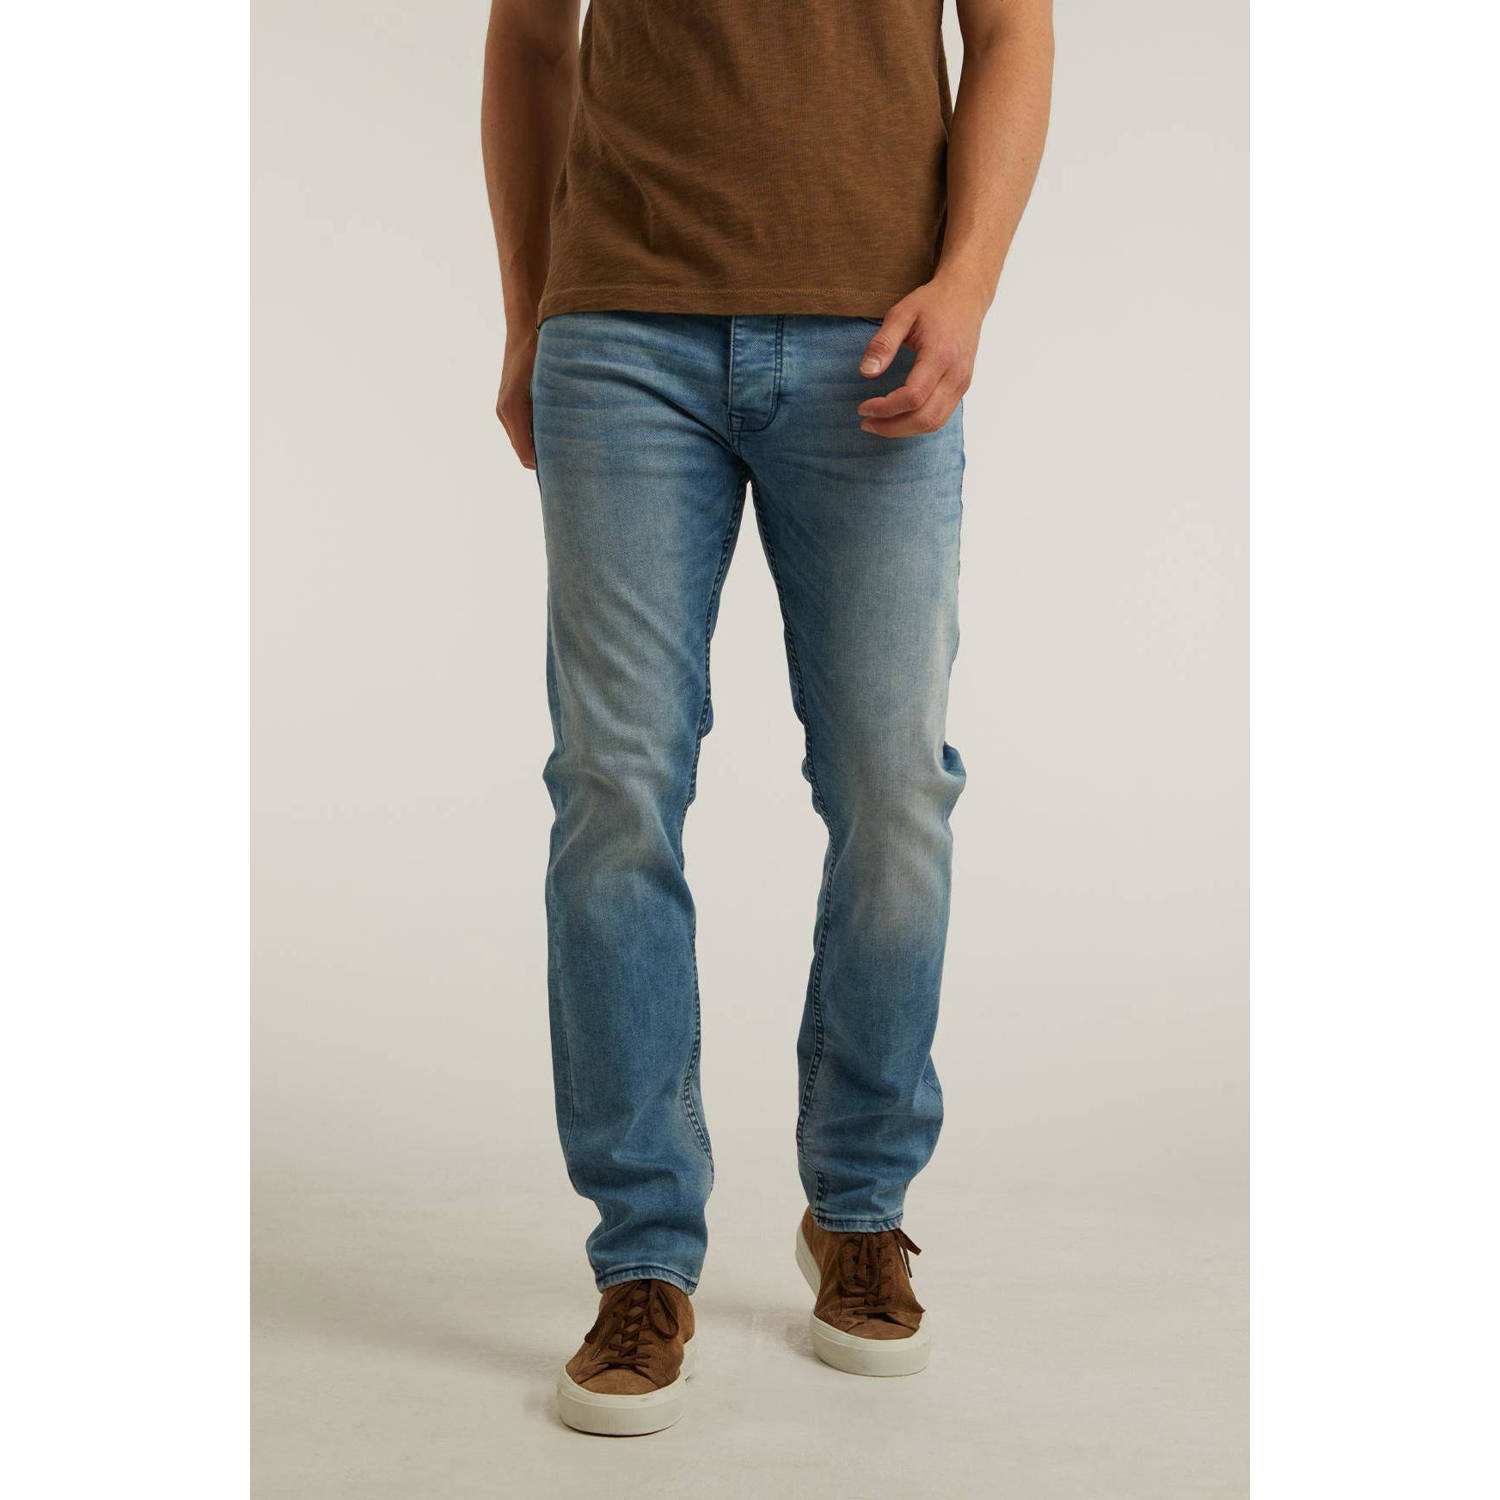 CHASIN' tapered fit jeans Crown Barkis mid blue